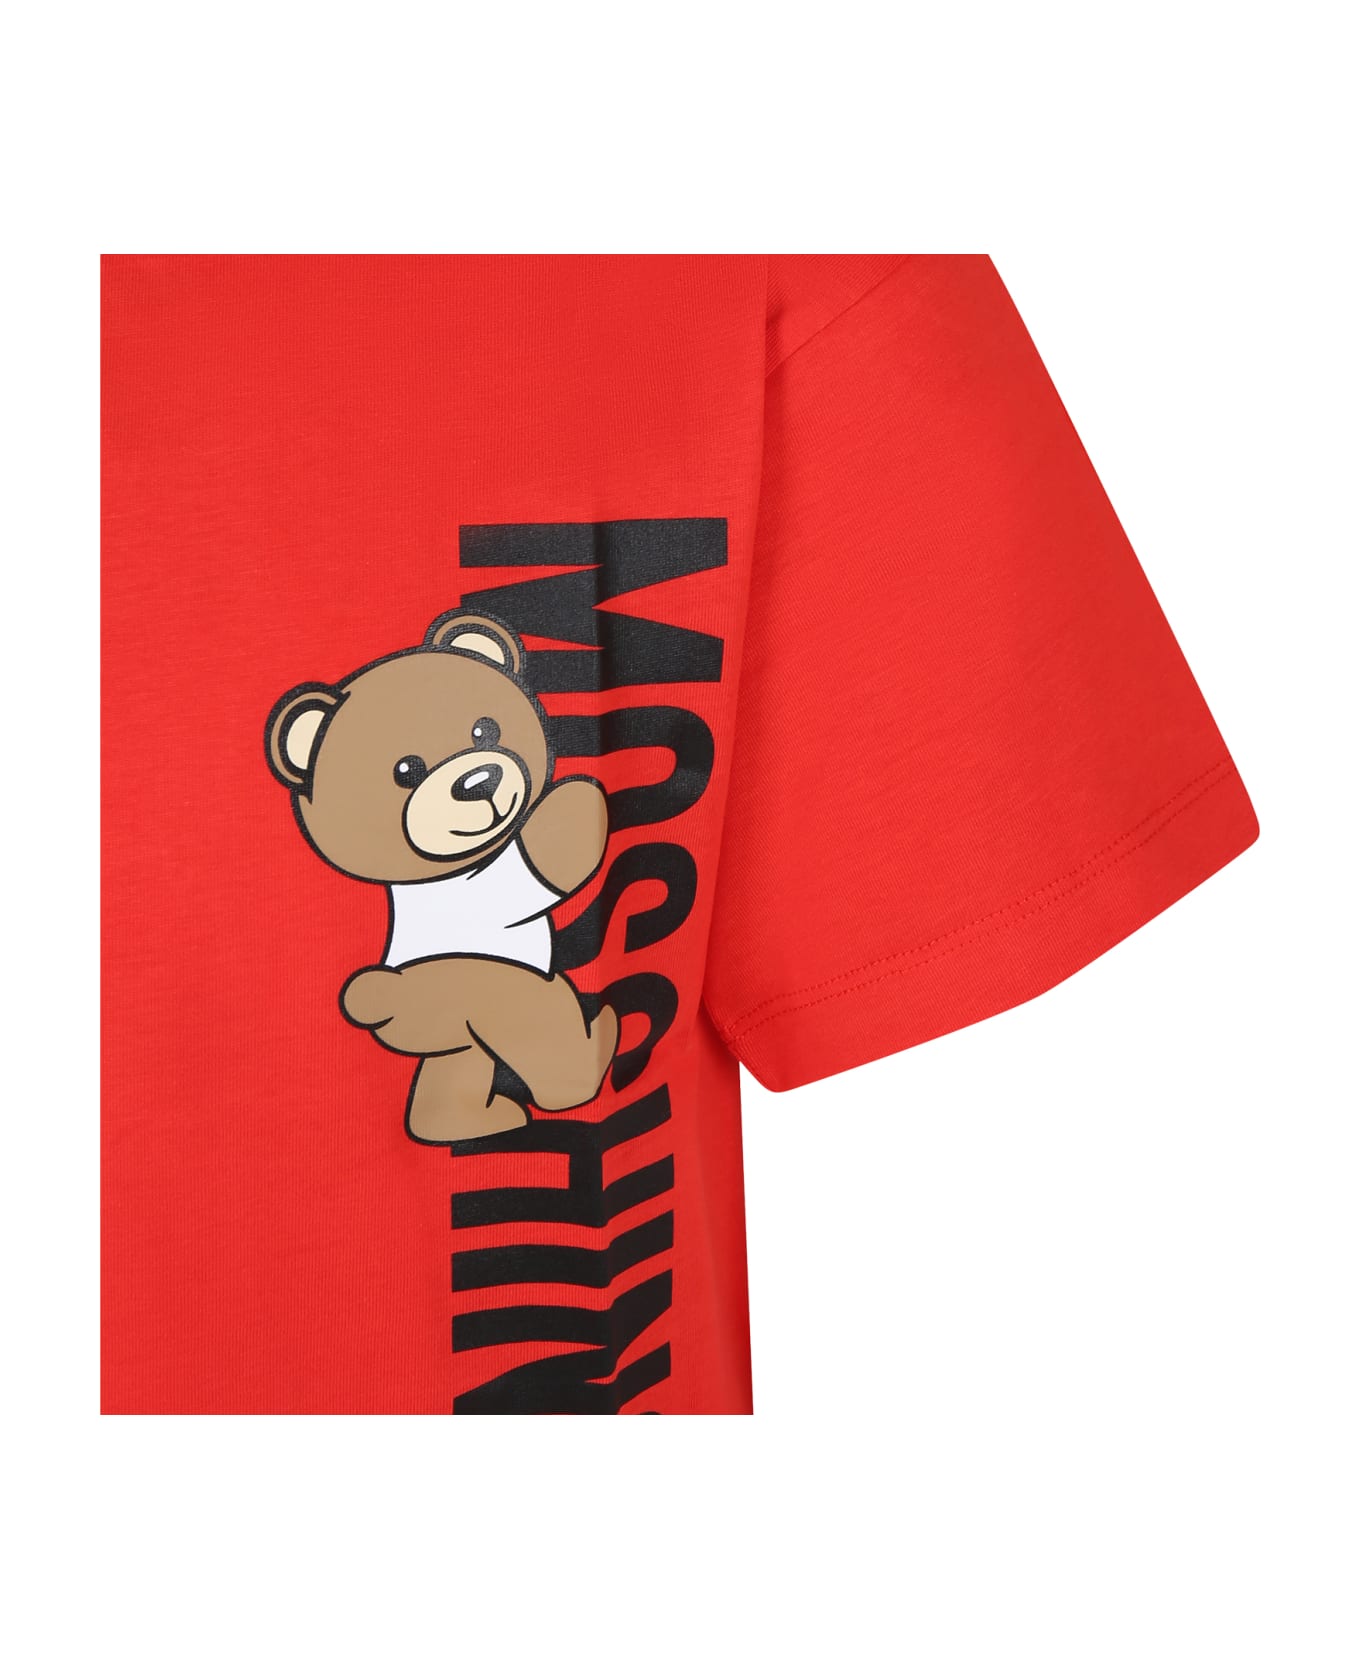 Moschino Red T-shirt For Kids With Teddy Bear And Logo - Red